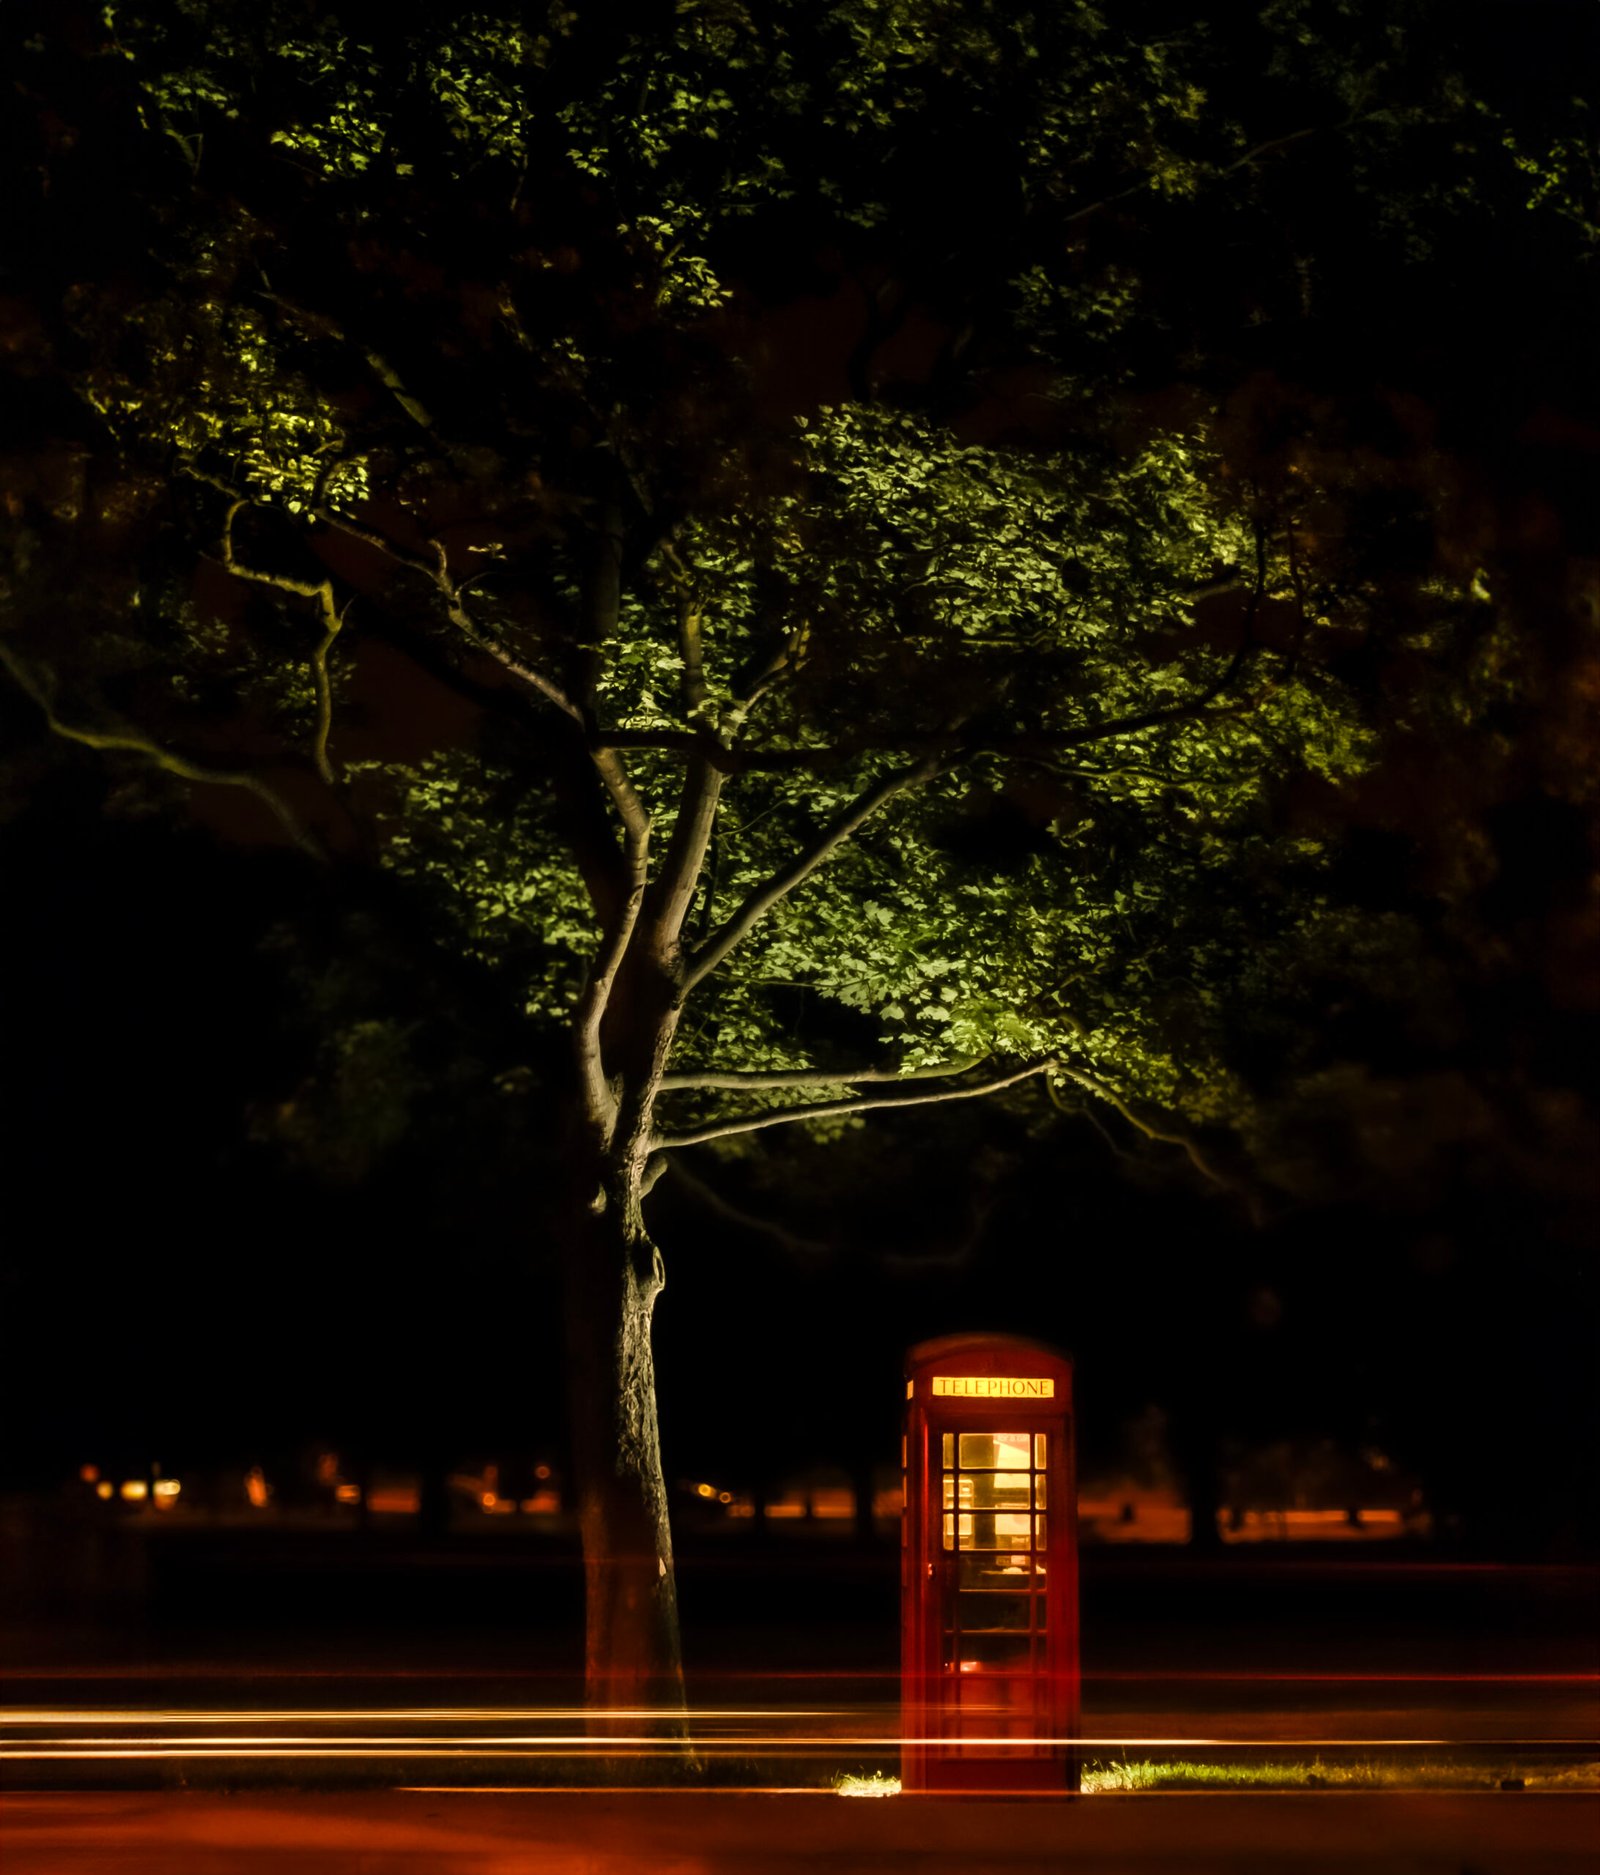 A traditional British red telephone box illuminated by night under a tree with passing traffic lights creating streaks in the foreground.